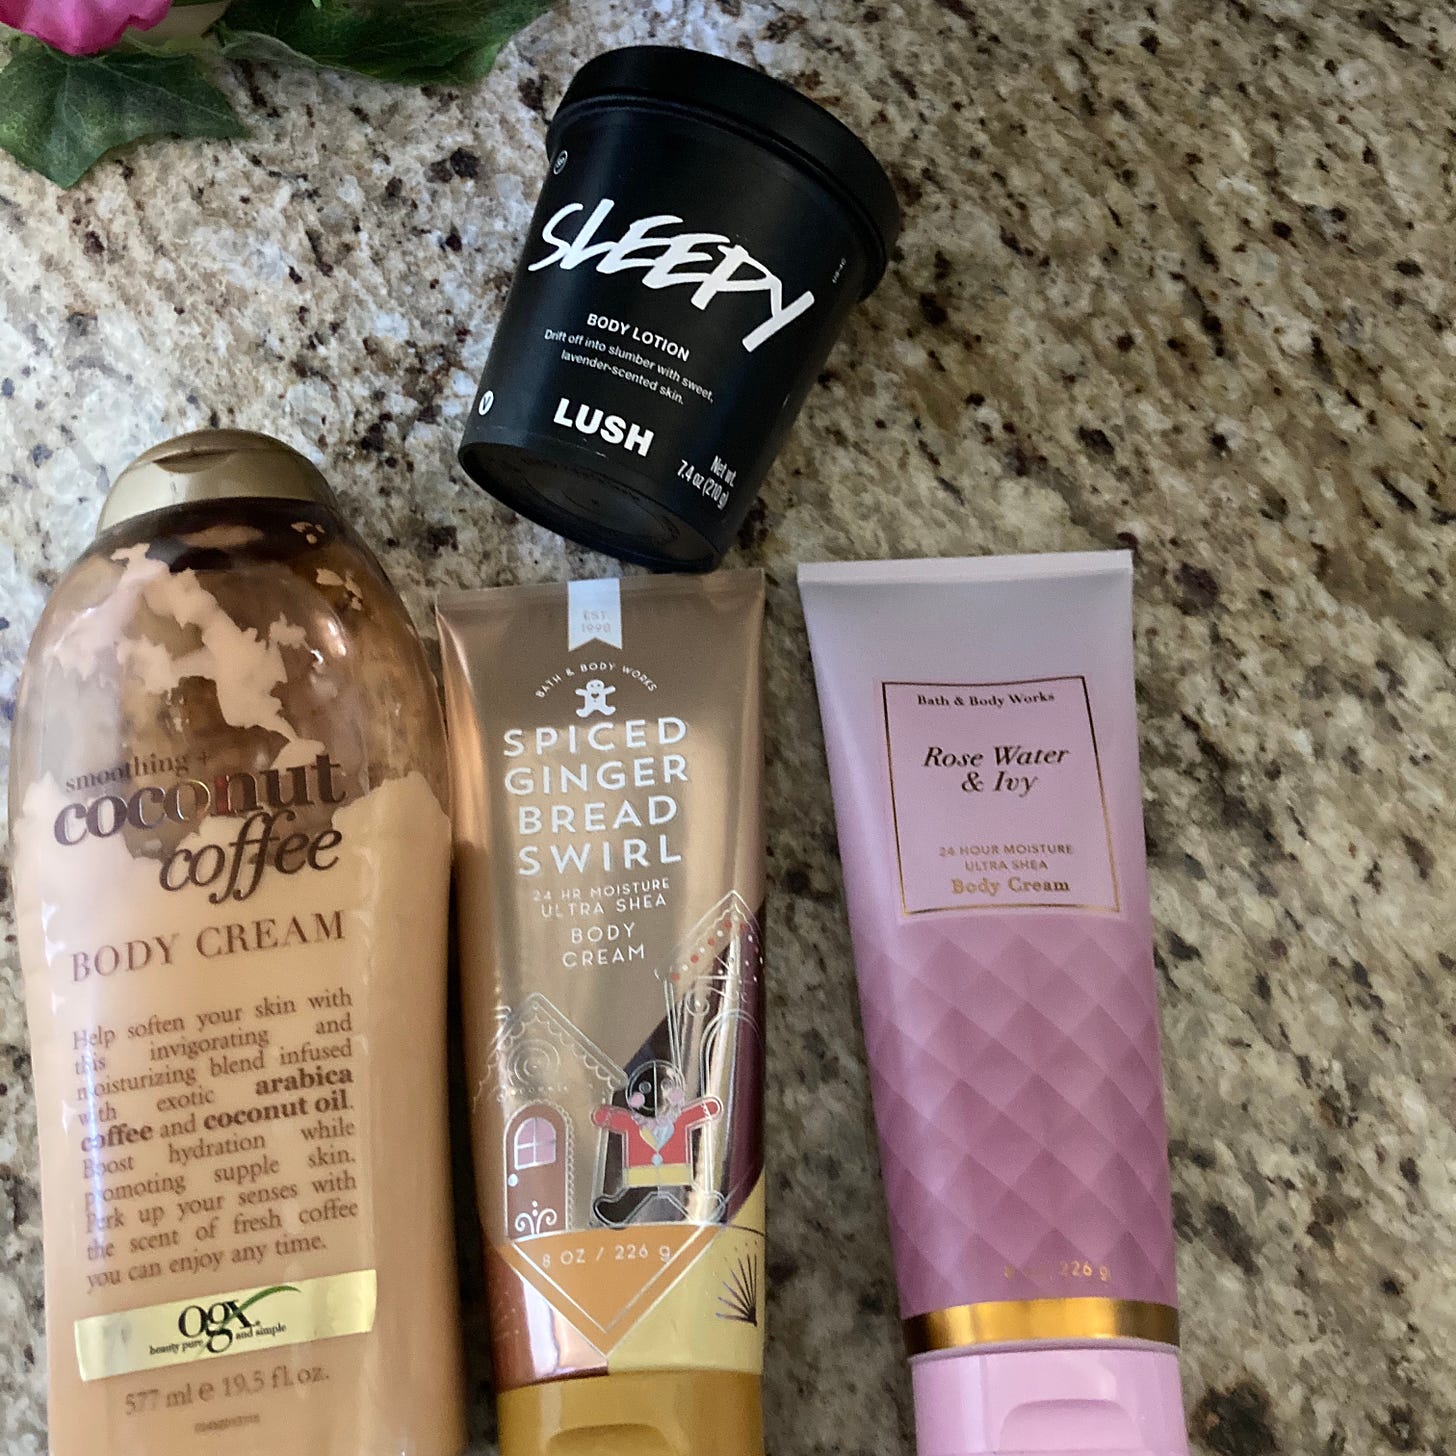 Visual description: A brown OGX coconut coffee lotion bottle, a shiny copper Bath and Body Works spiced gingerbread swirl lotion tube decorated with gingerbread men, a pink gradient Bath and Body Works rose water and ivy lotion tube, and a black Lush pot of Sleepy lotion all rest close together on a gray and brown granite countertop.